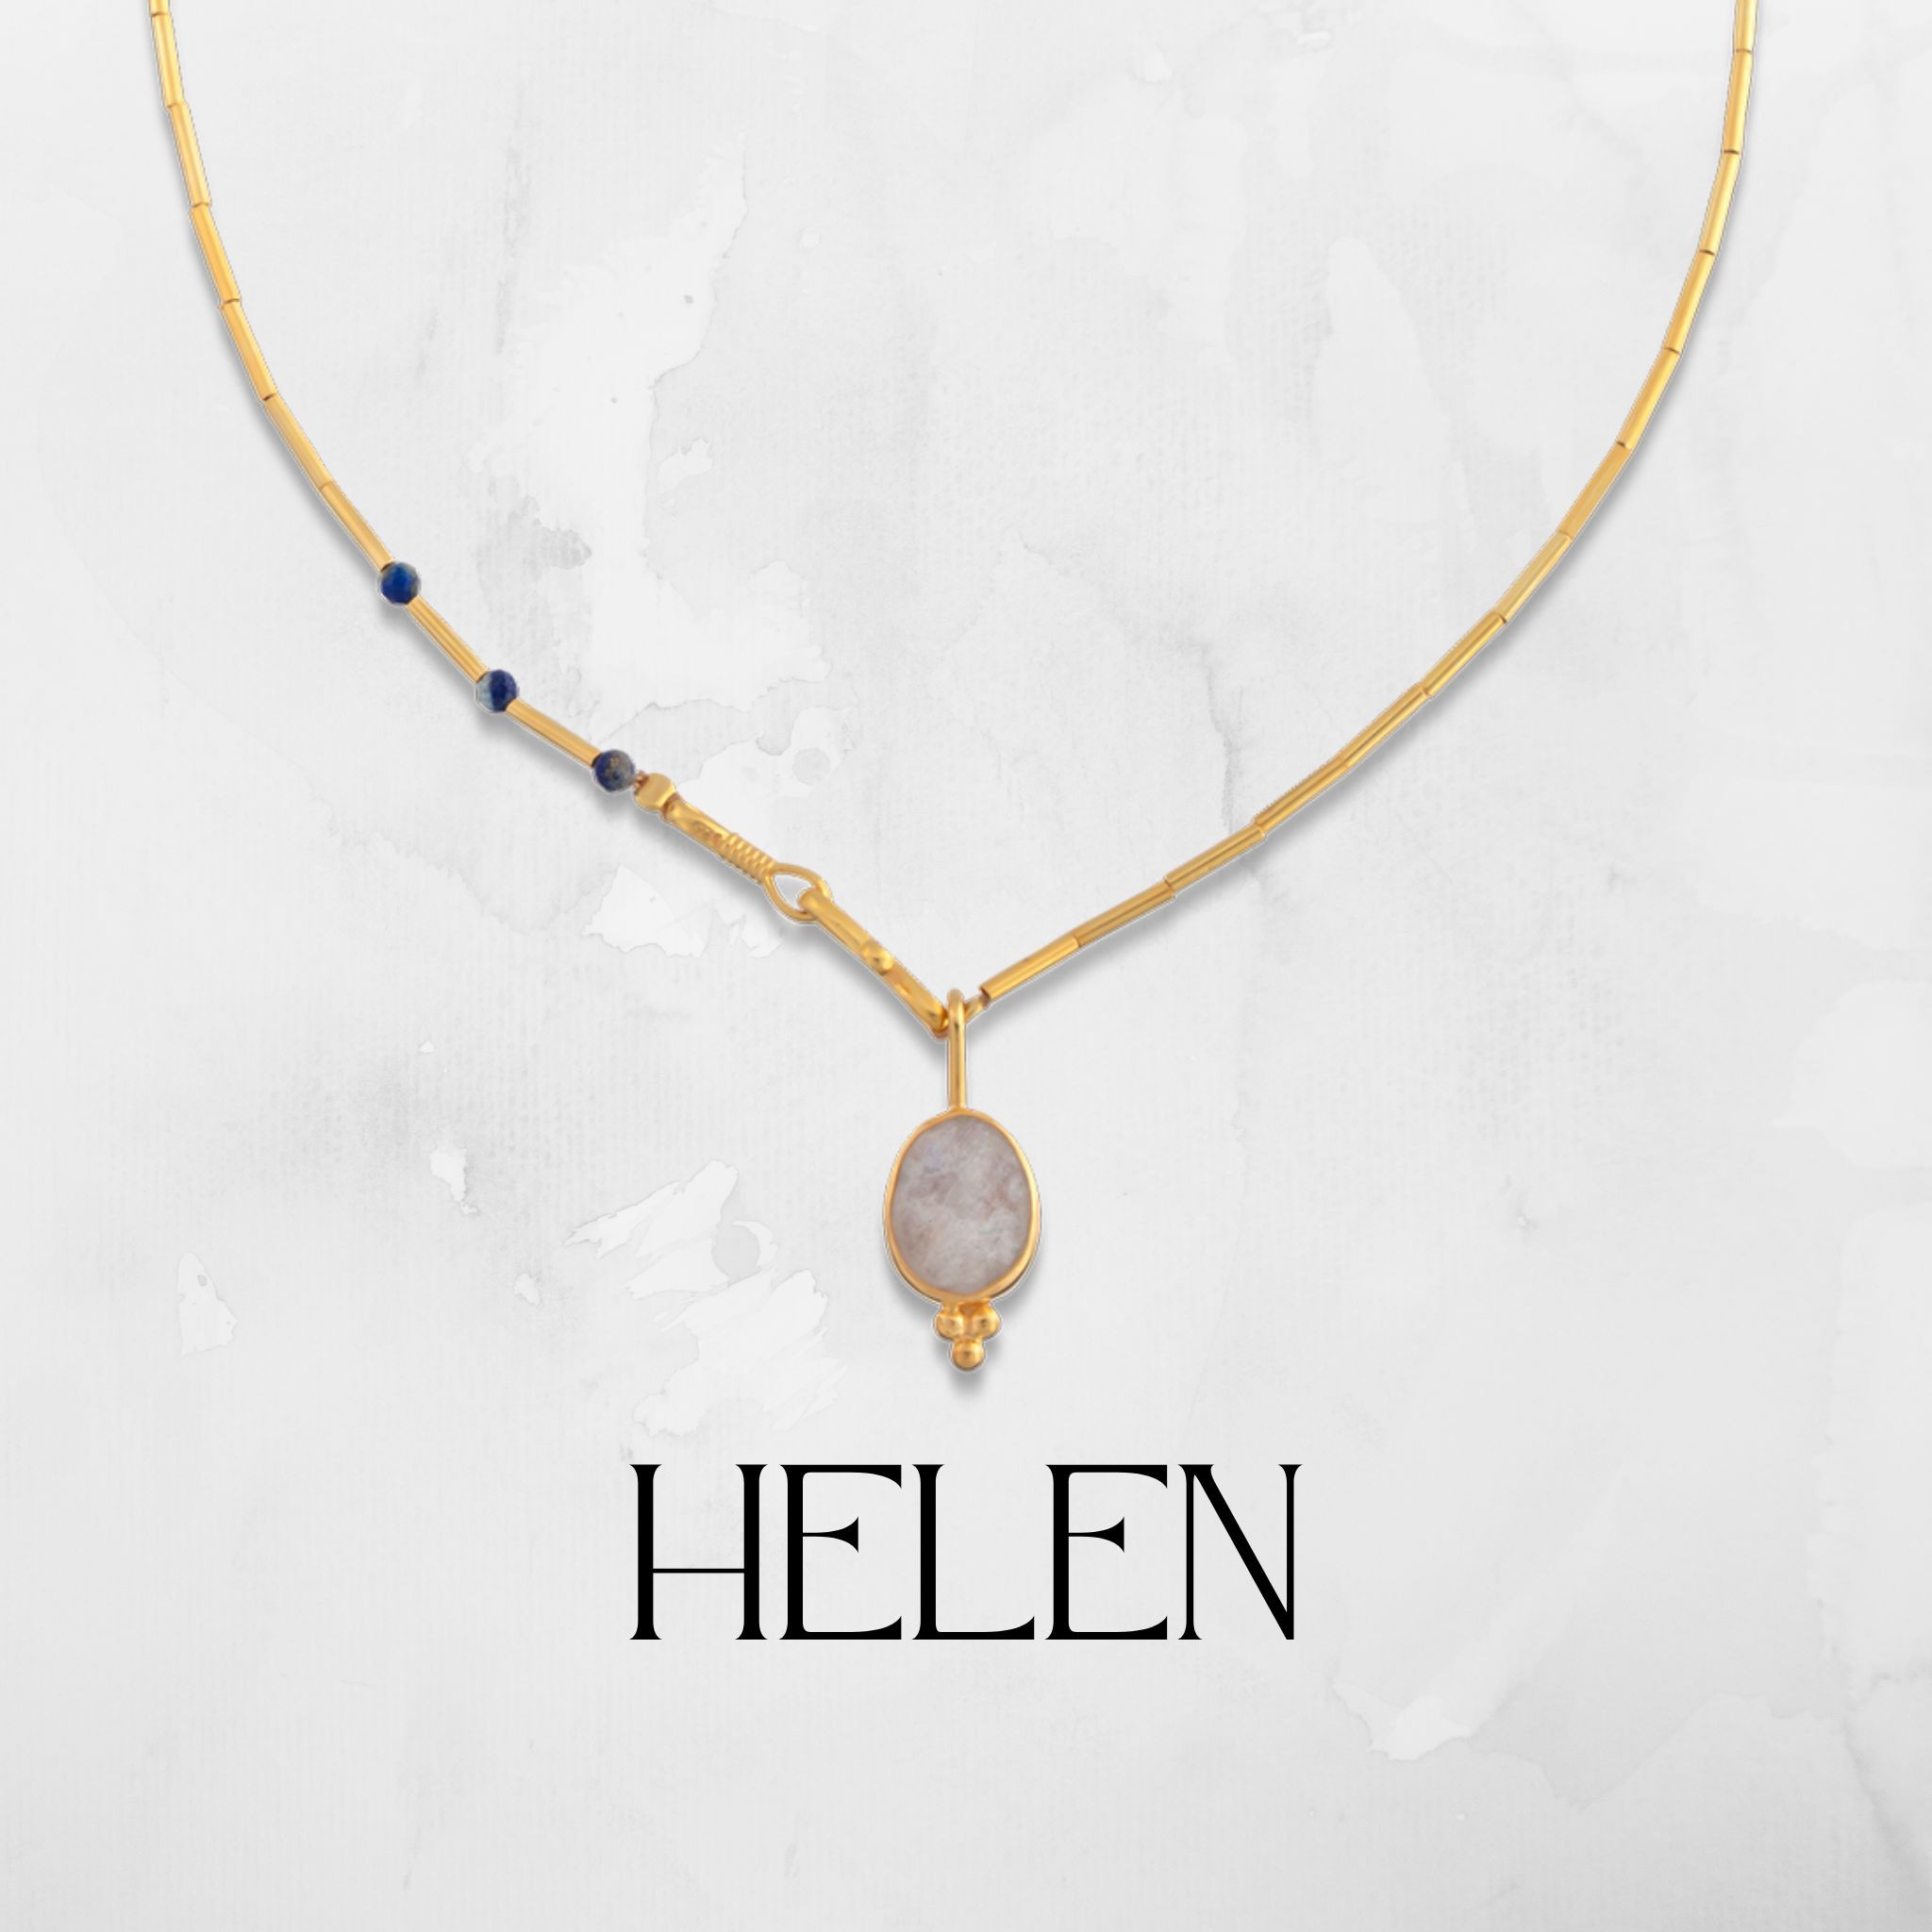 Helen Necklace with Moonstone Pendant